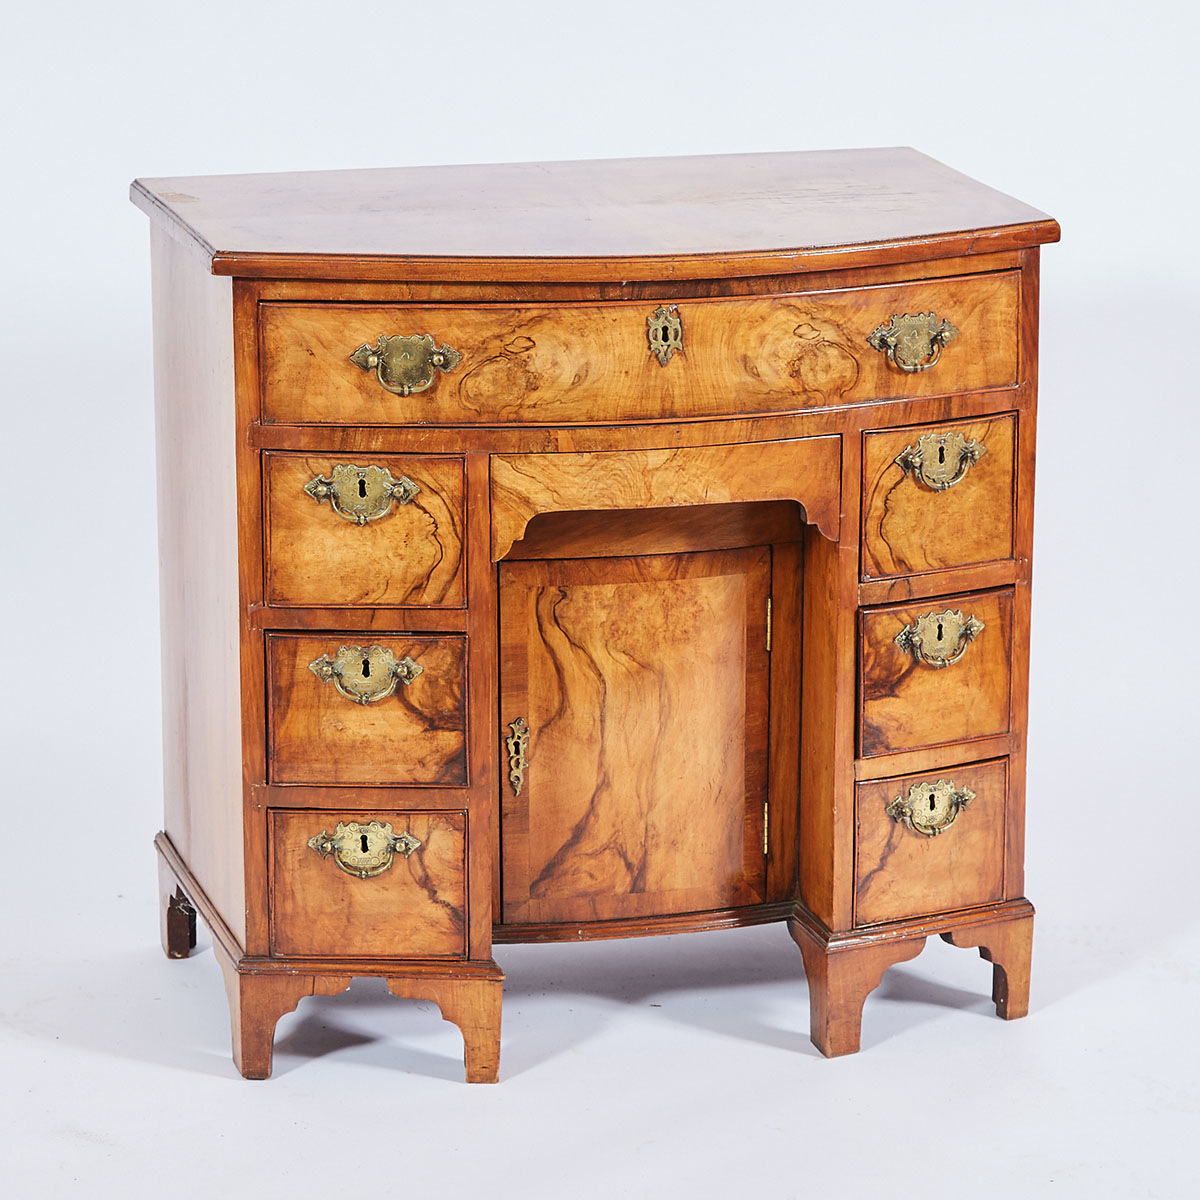 Small George II Style Figured Walnut Bow Front Kneehole Dressing Table, 19th century